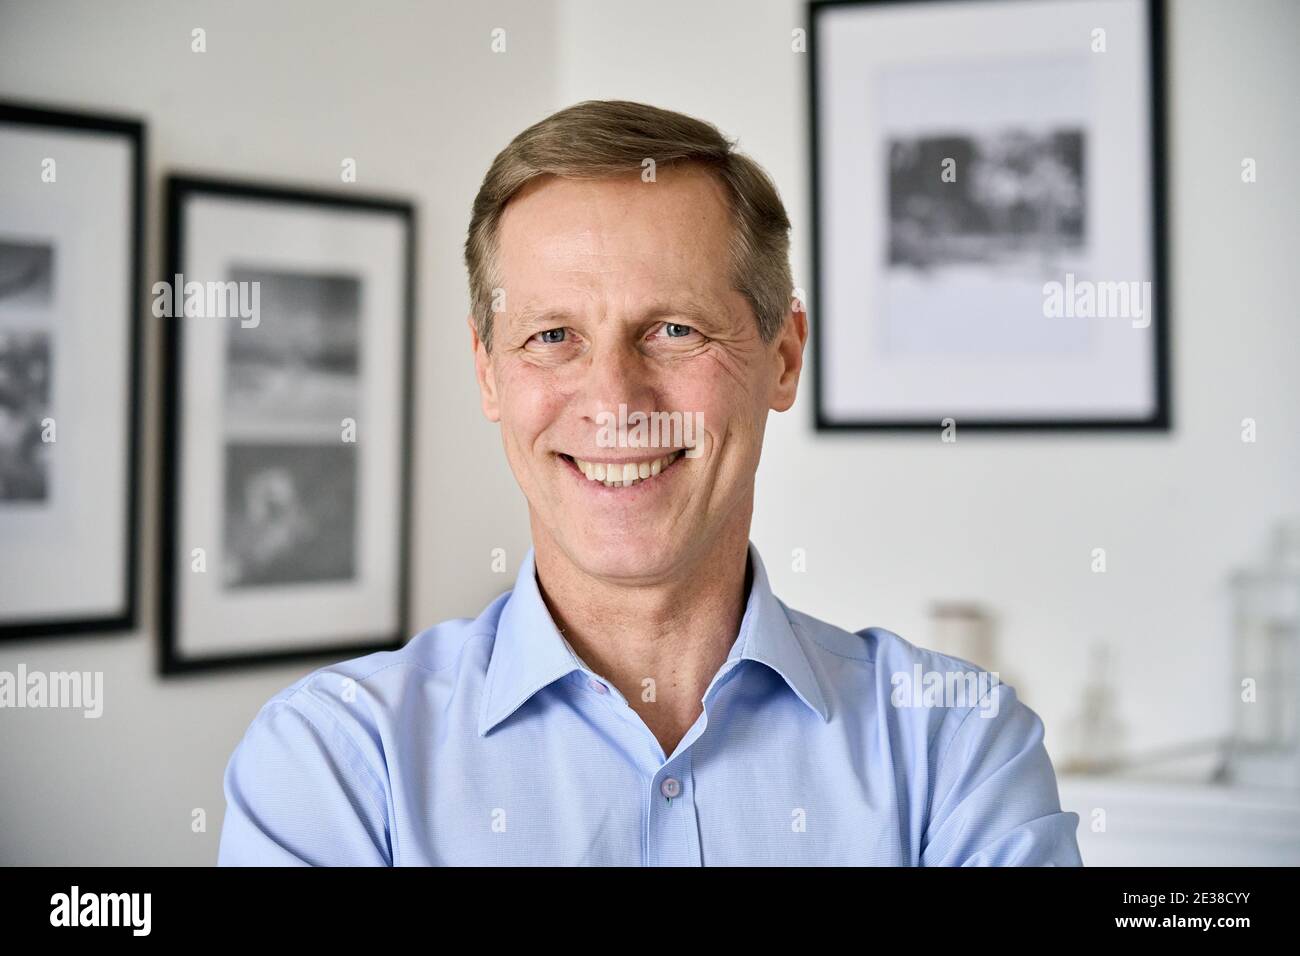 Smiling middle aged 50s man looking at camera at home, headshot portrait. Stock Photo